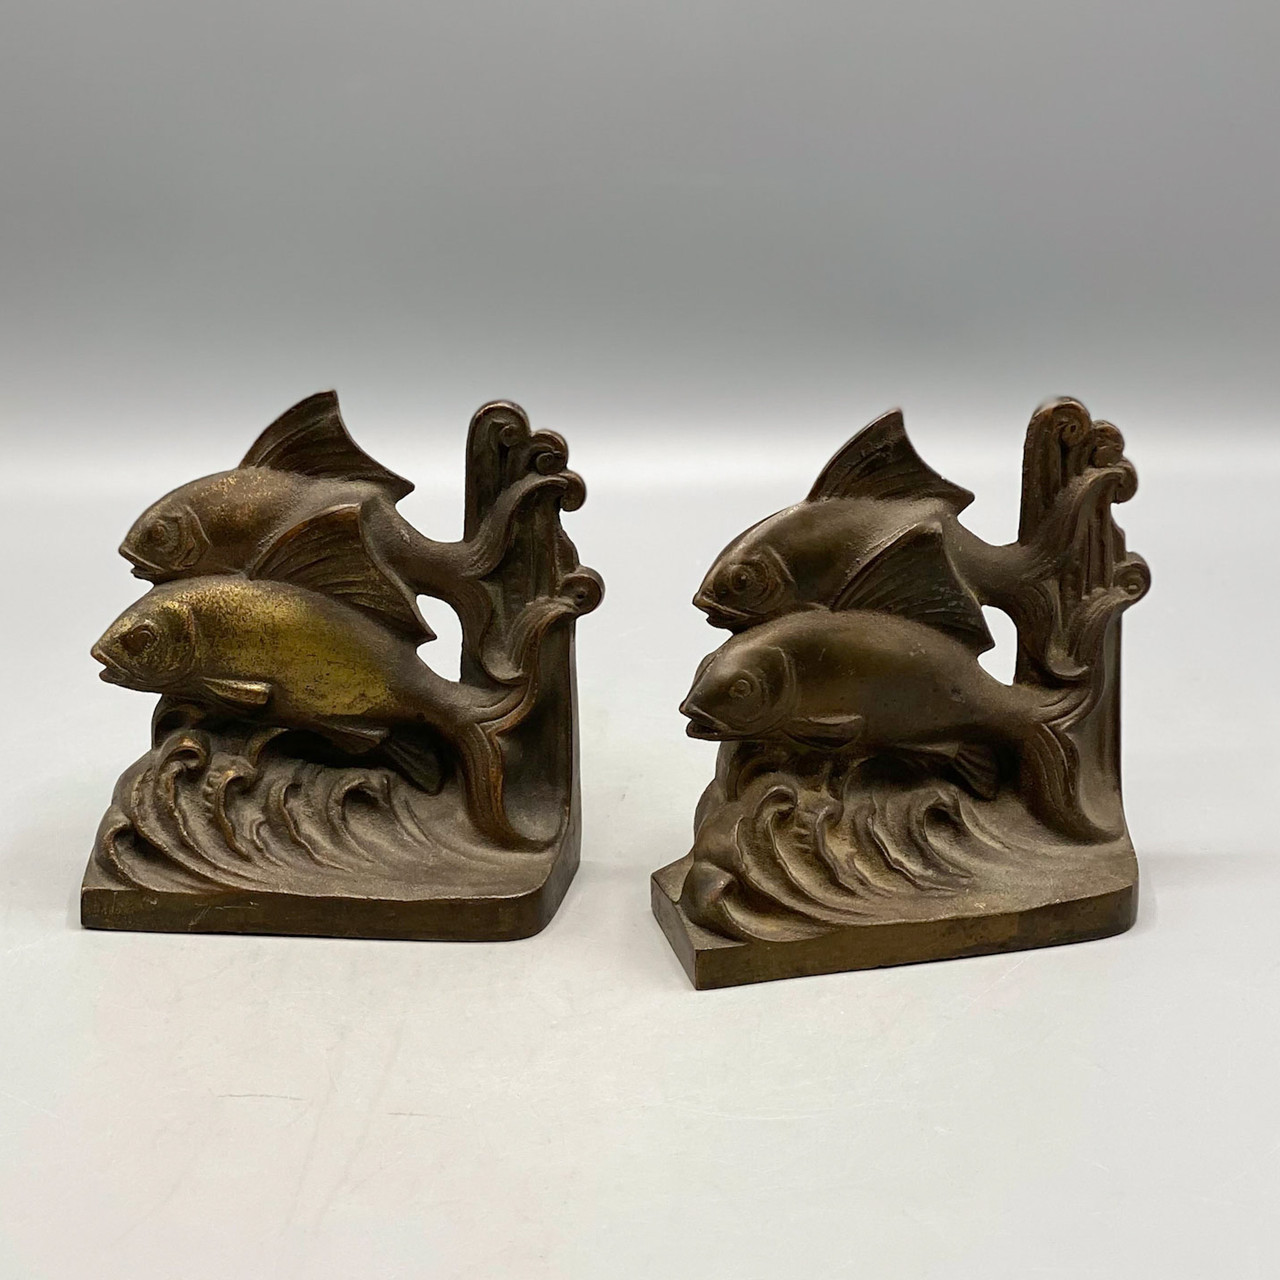 Pair Of Bronze Bookends With Fish And Seahorses. 6 3/4